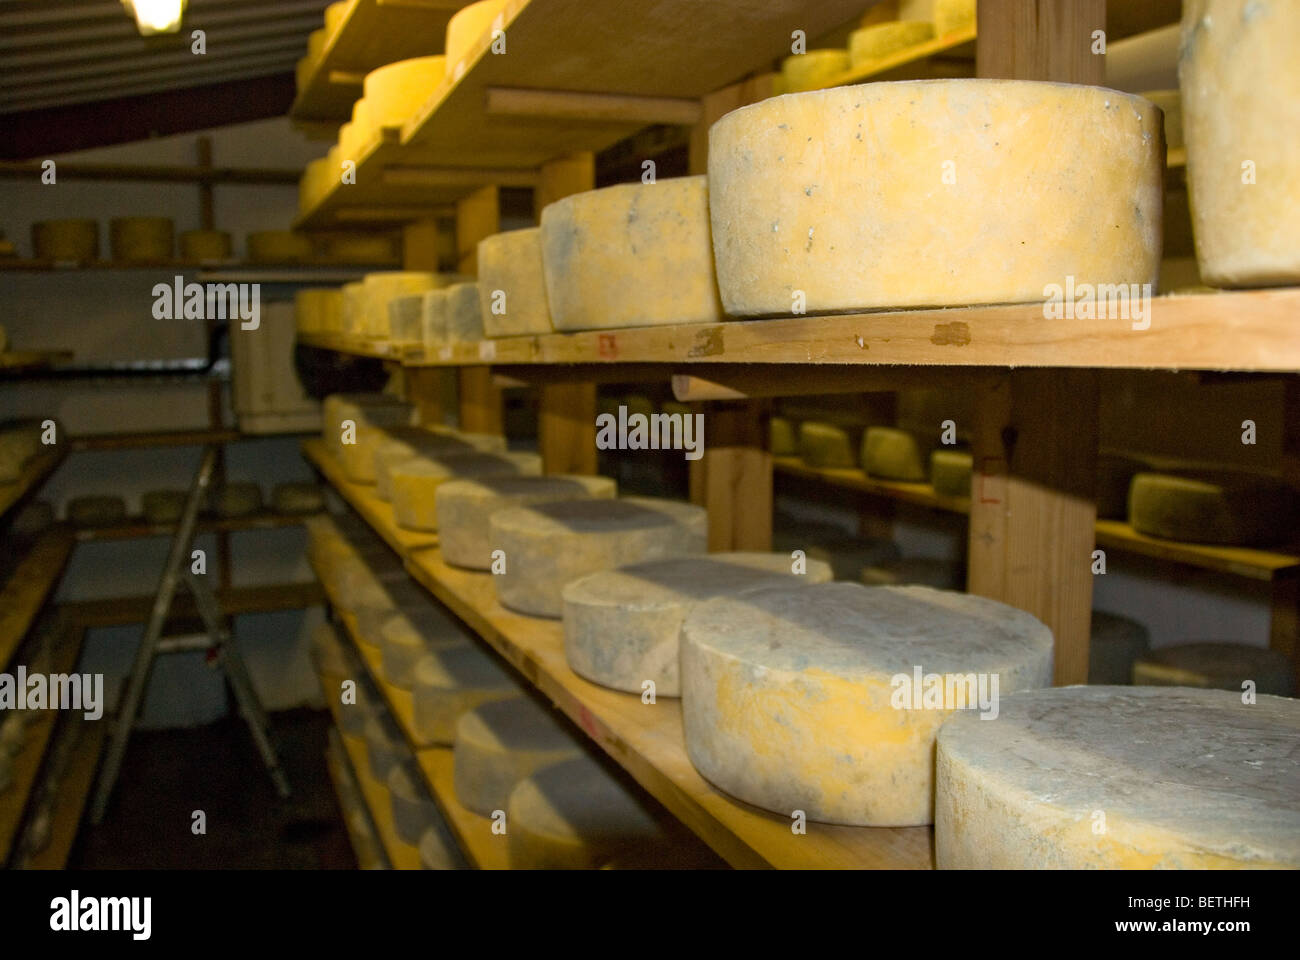 Little Hereford cheeses maturing on shelves at Monkland Cheese Dairy, near Leominster, Herefordshire, England. Stock Photo